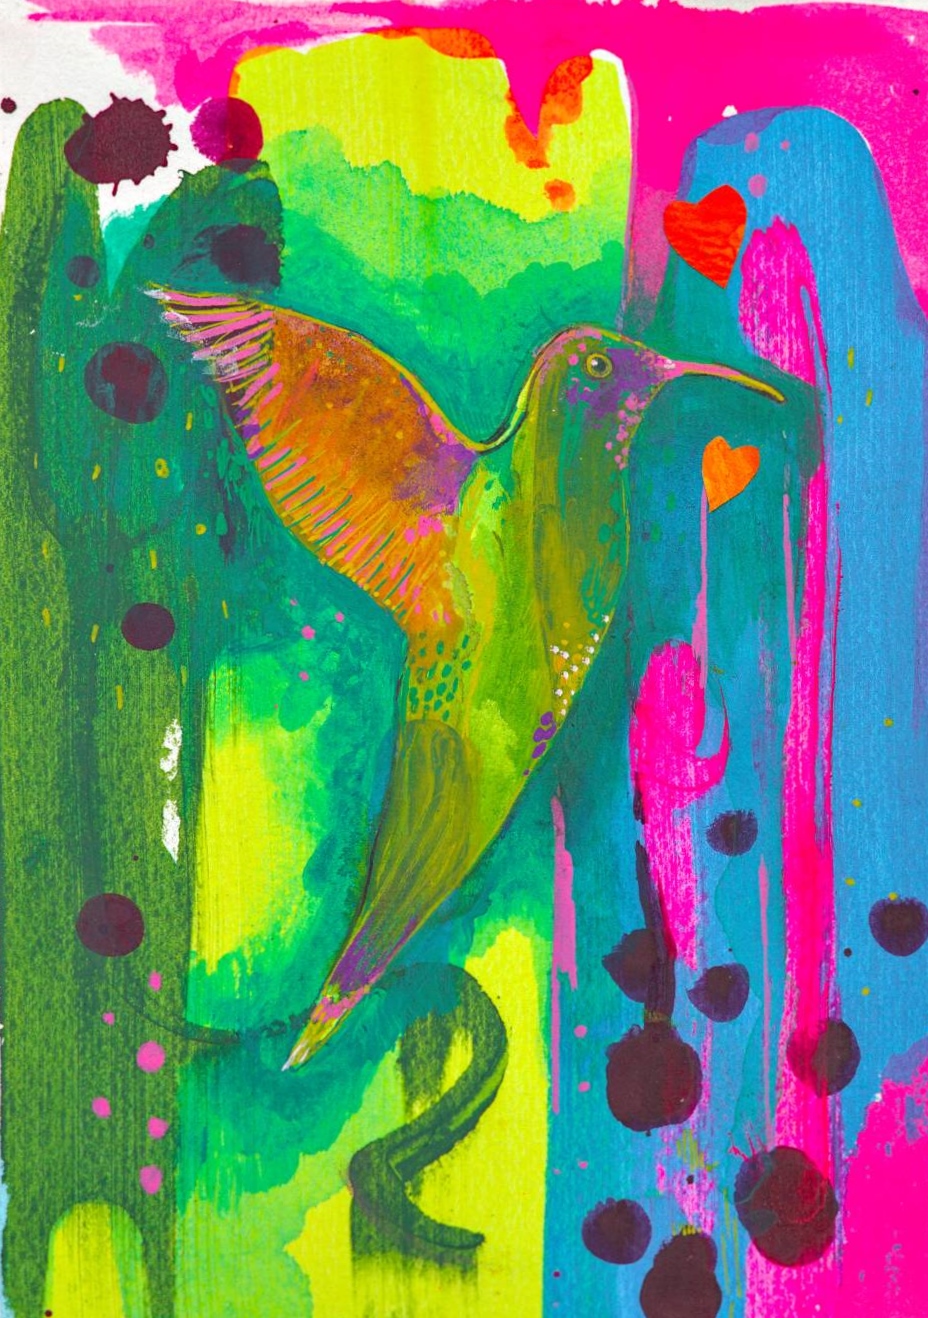 Types of print - Colourful hummingbird Print. Abstract background painted and printed with vibrant pinks, blues, yellows and greens. The humming bird is also painted colourfully on top of the abstract background.